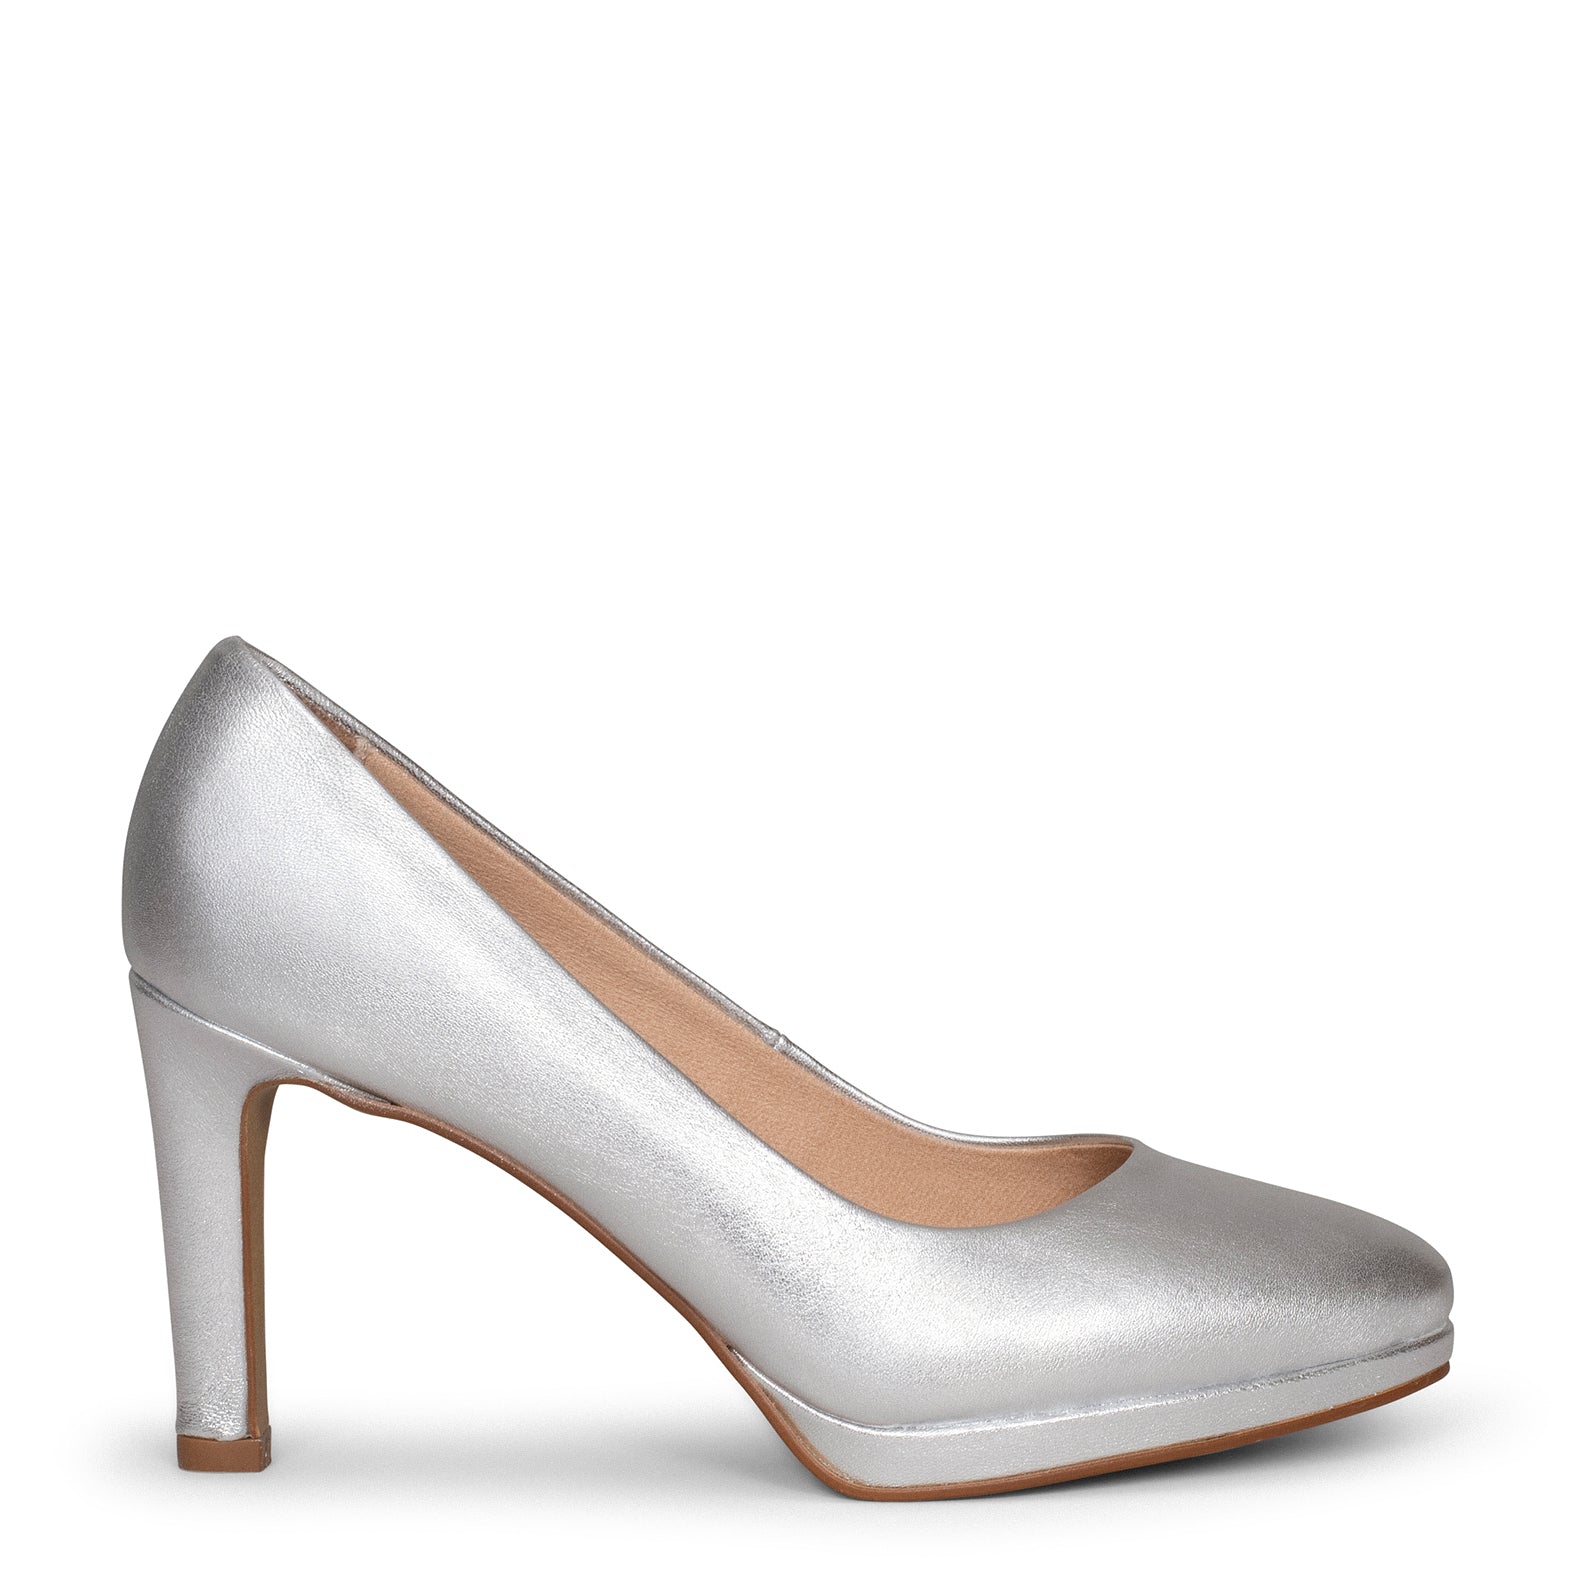 Silver High Heels With Heart Decoration | SHEIN ASIA